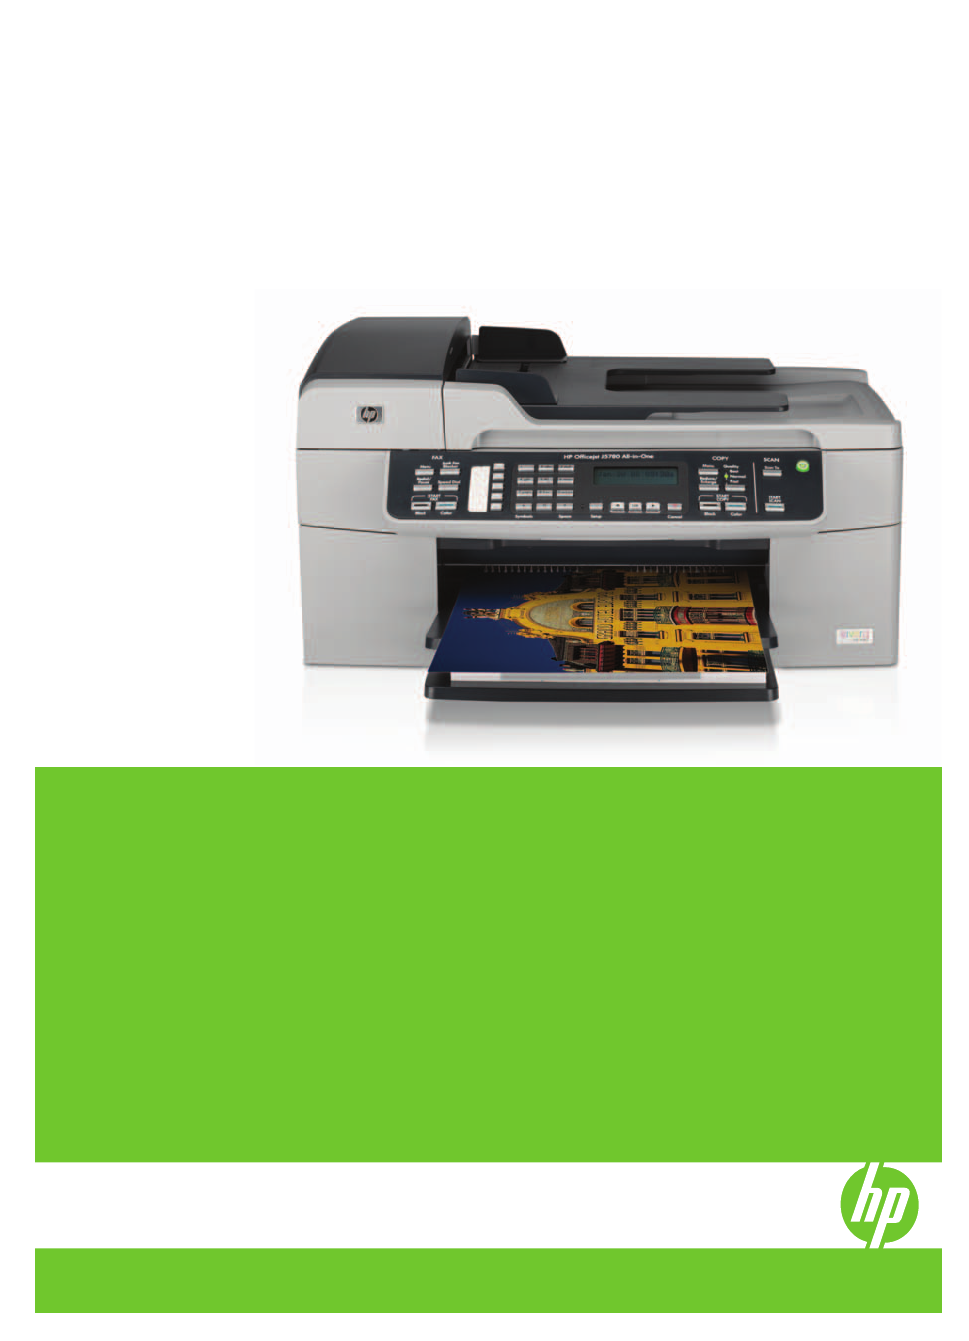 Hp officejet 6950 all in one series